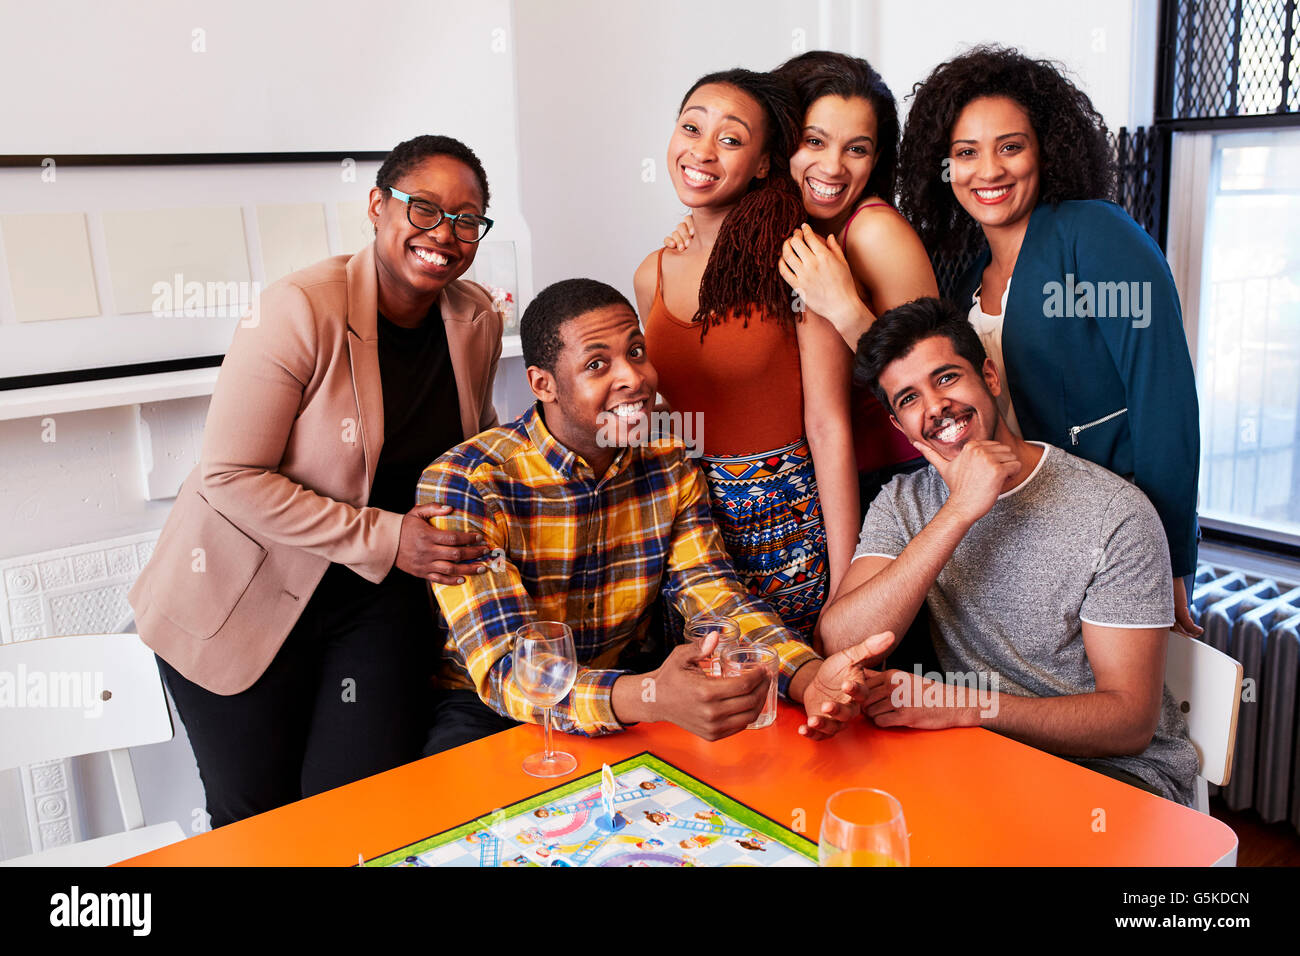 Friends smiling at party Stock Photo